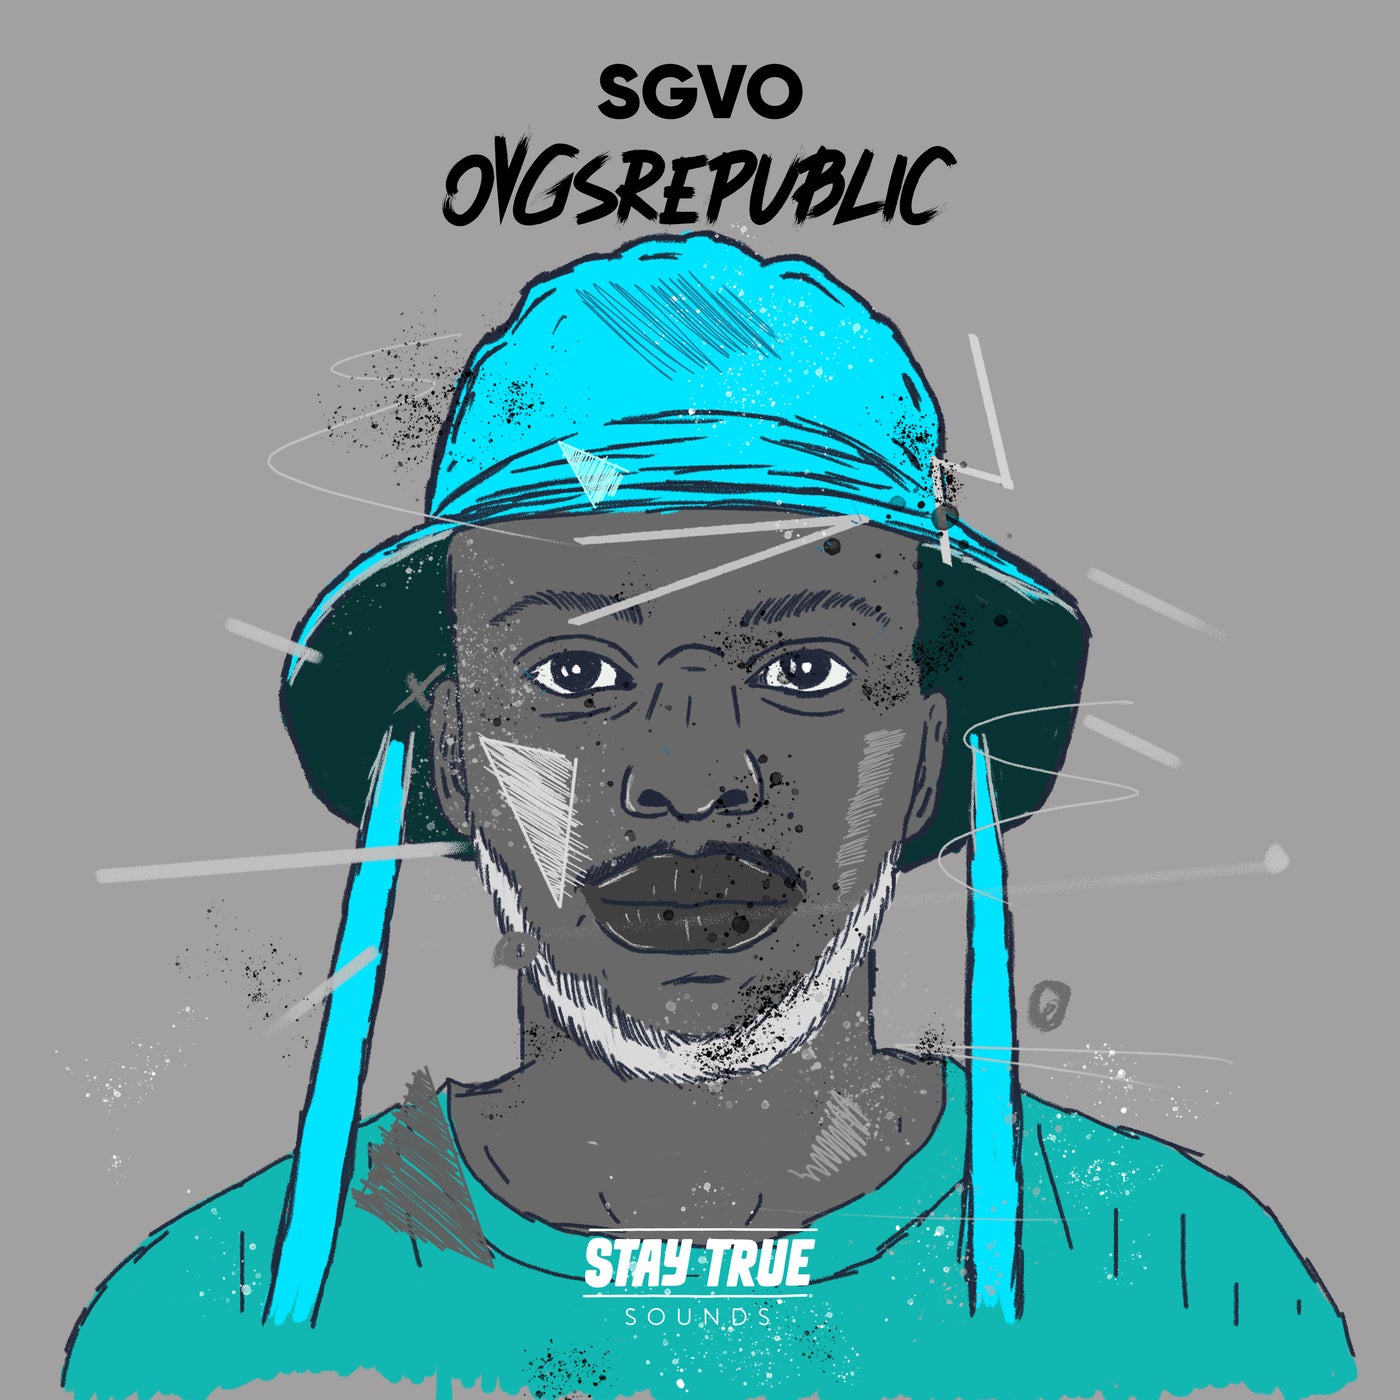 SGVO - Ovgsrepublic [Stay True Sounds]